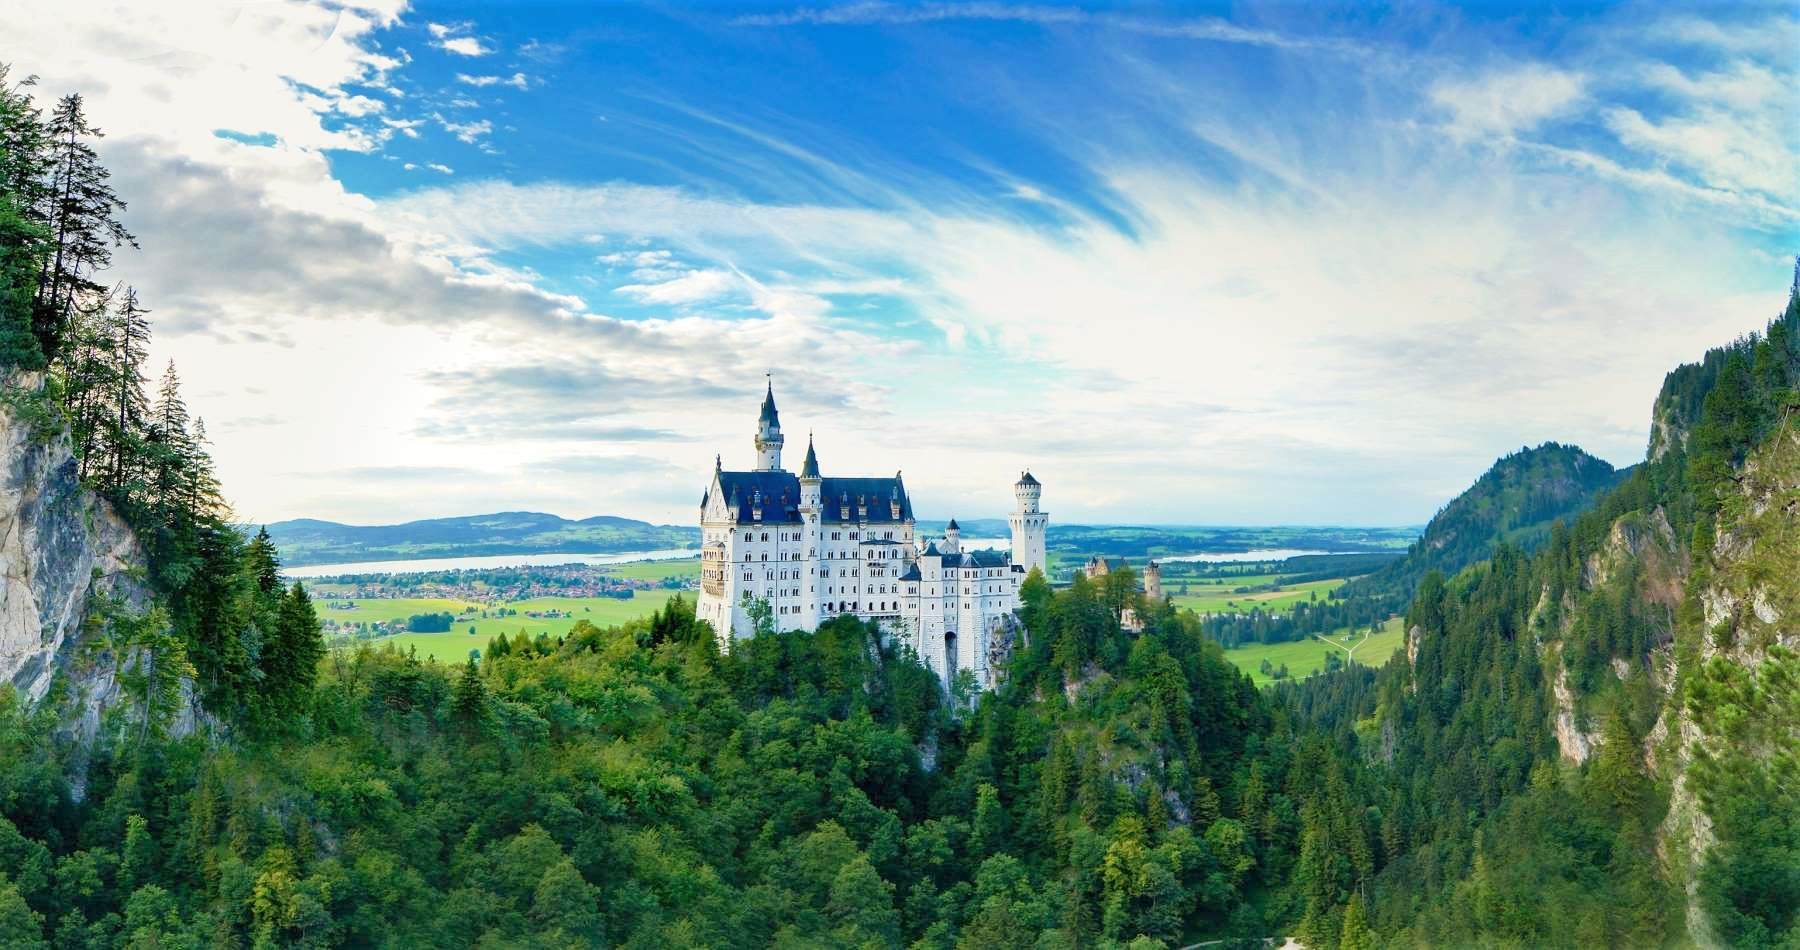 12 Most Beautiful Fairytale Castles in Germany - Endless Travel Destinations